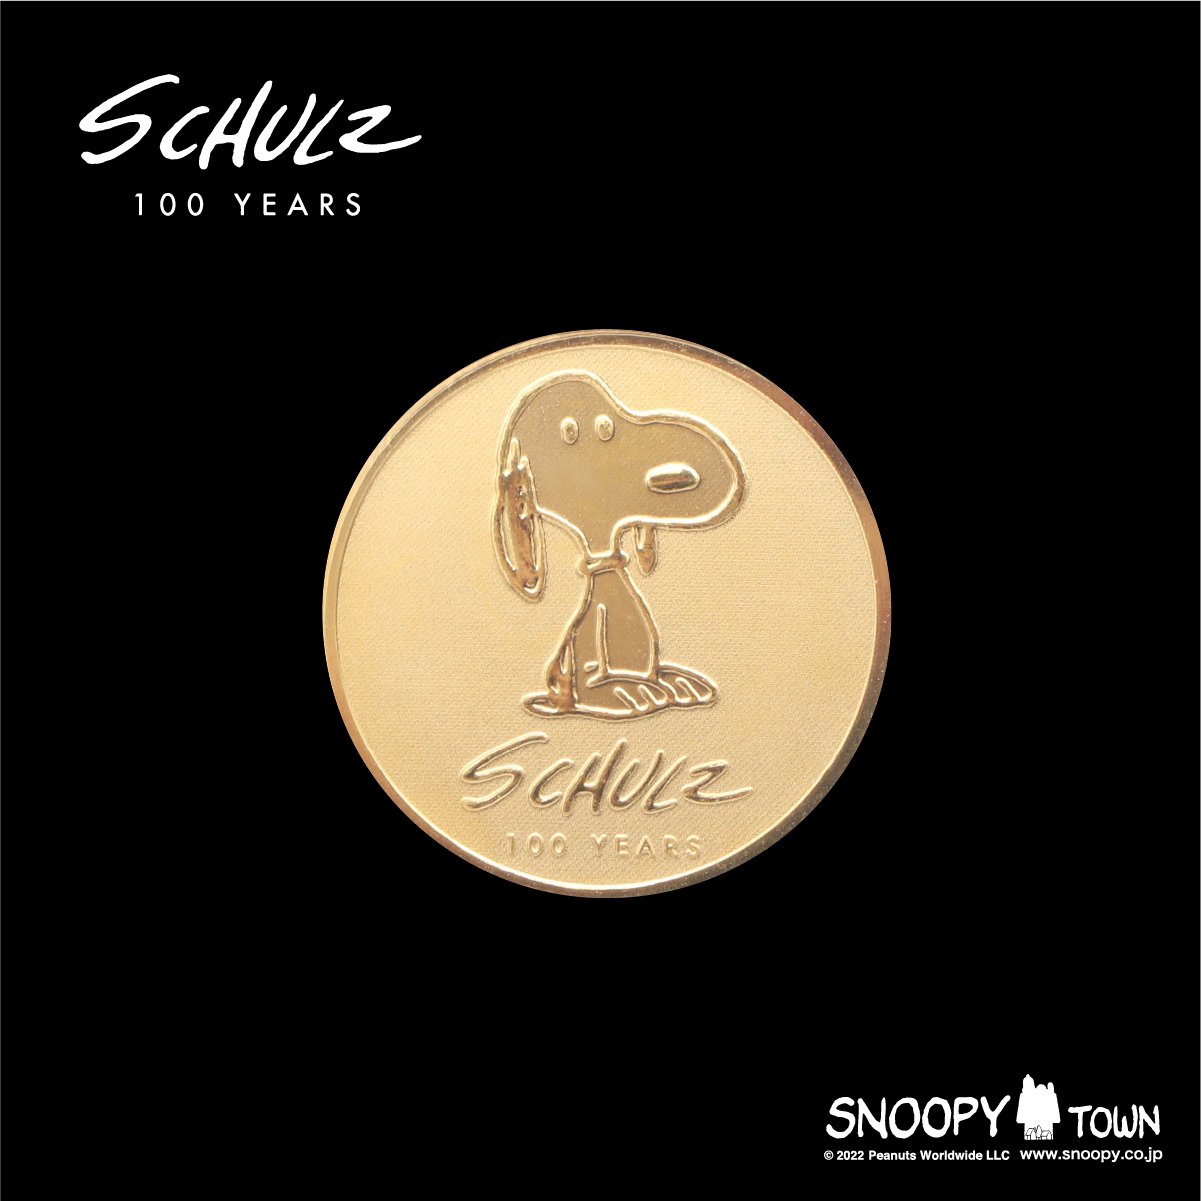 Schulz 100 years Snoopy Town Shop 純金メダル